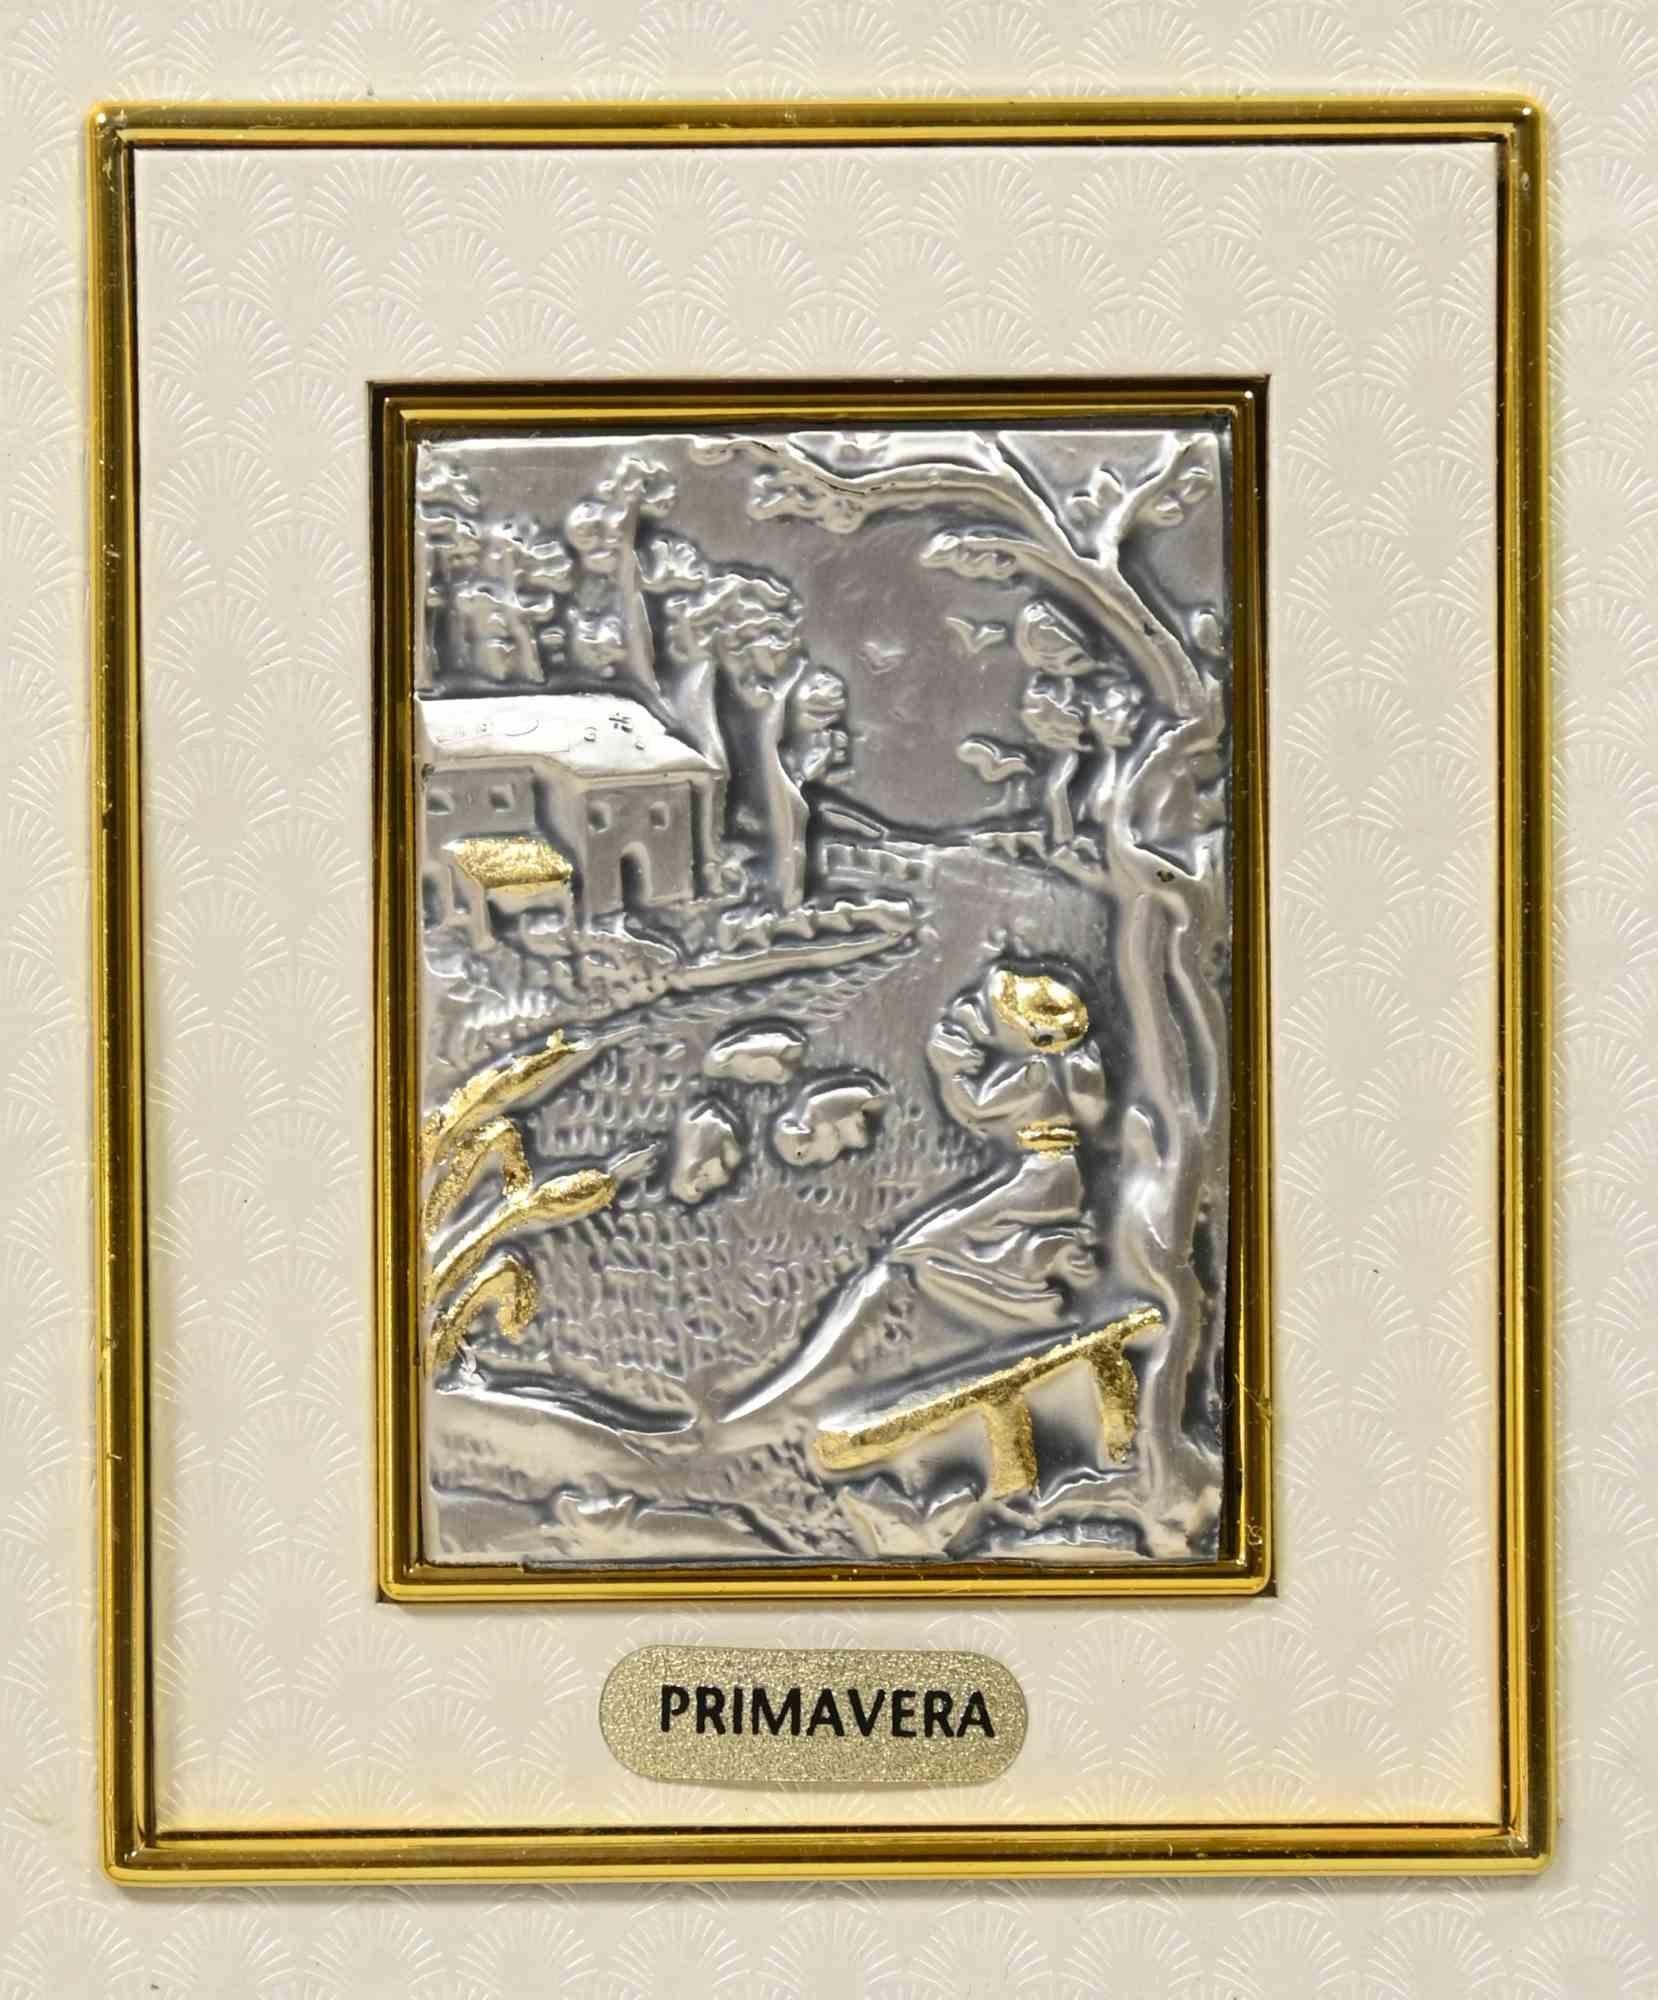 Spring is an original modern artwork realized in 1970s.

Realized by Euroesse (label on the back)

The artwork is realized on silver plate and gold leaf.

Includes frame.